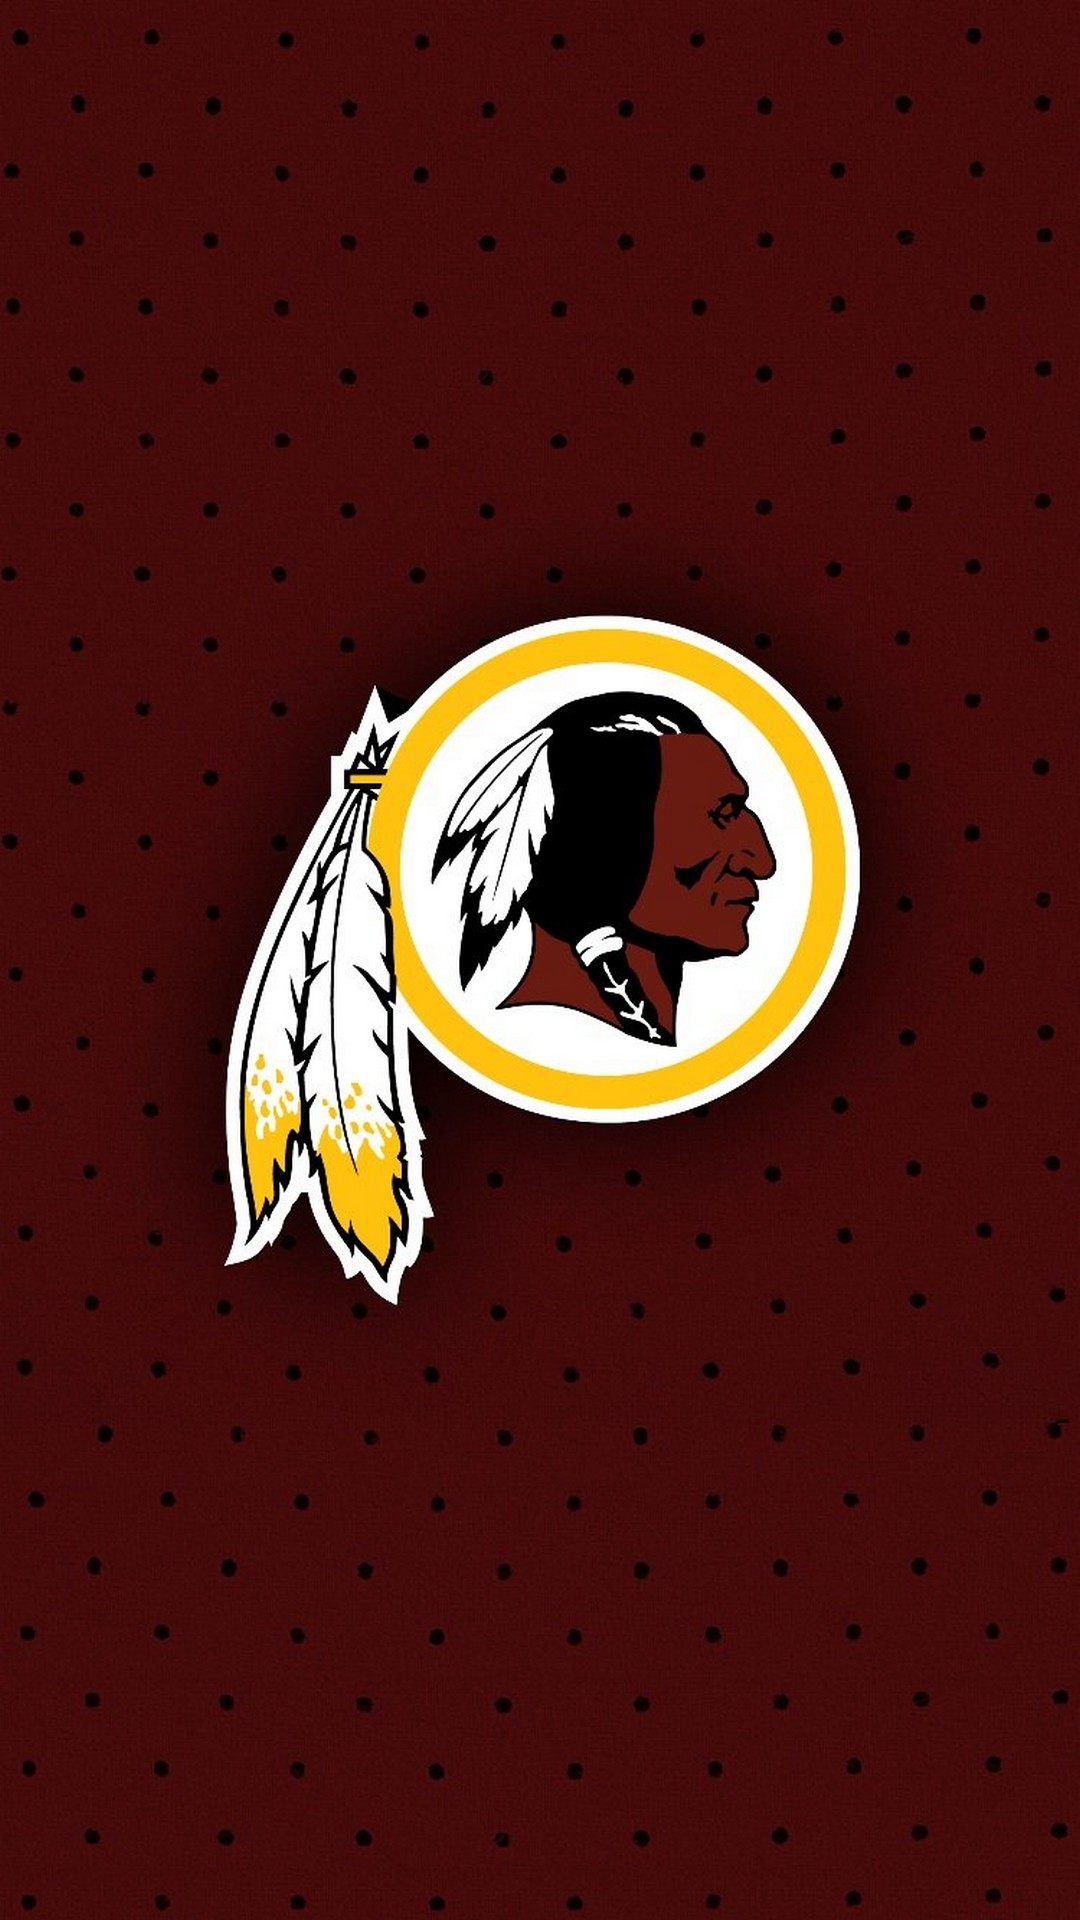 iPhone Wallpaper HD Washington Redskins with high-resolution 1080x1920 pixel. You can use this wallpaper for your Mac or Windows Desktop Background, iPhone, Android or Tablet and another Smartphone device